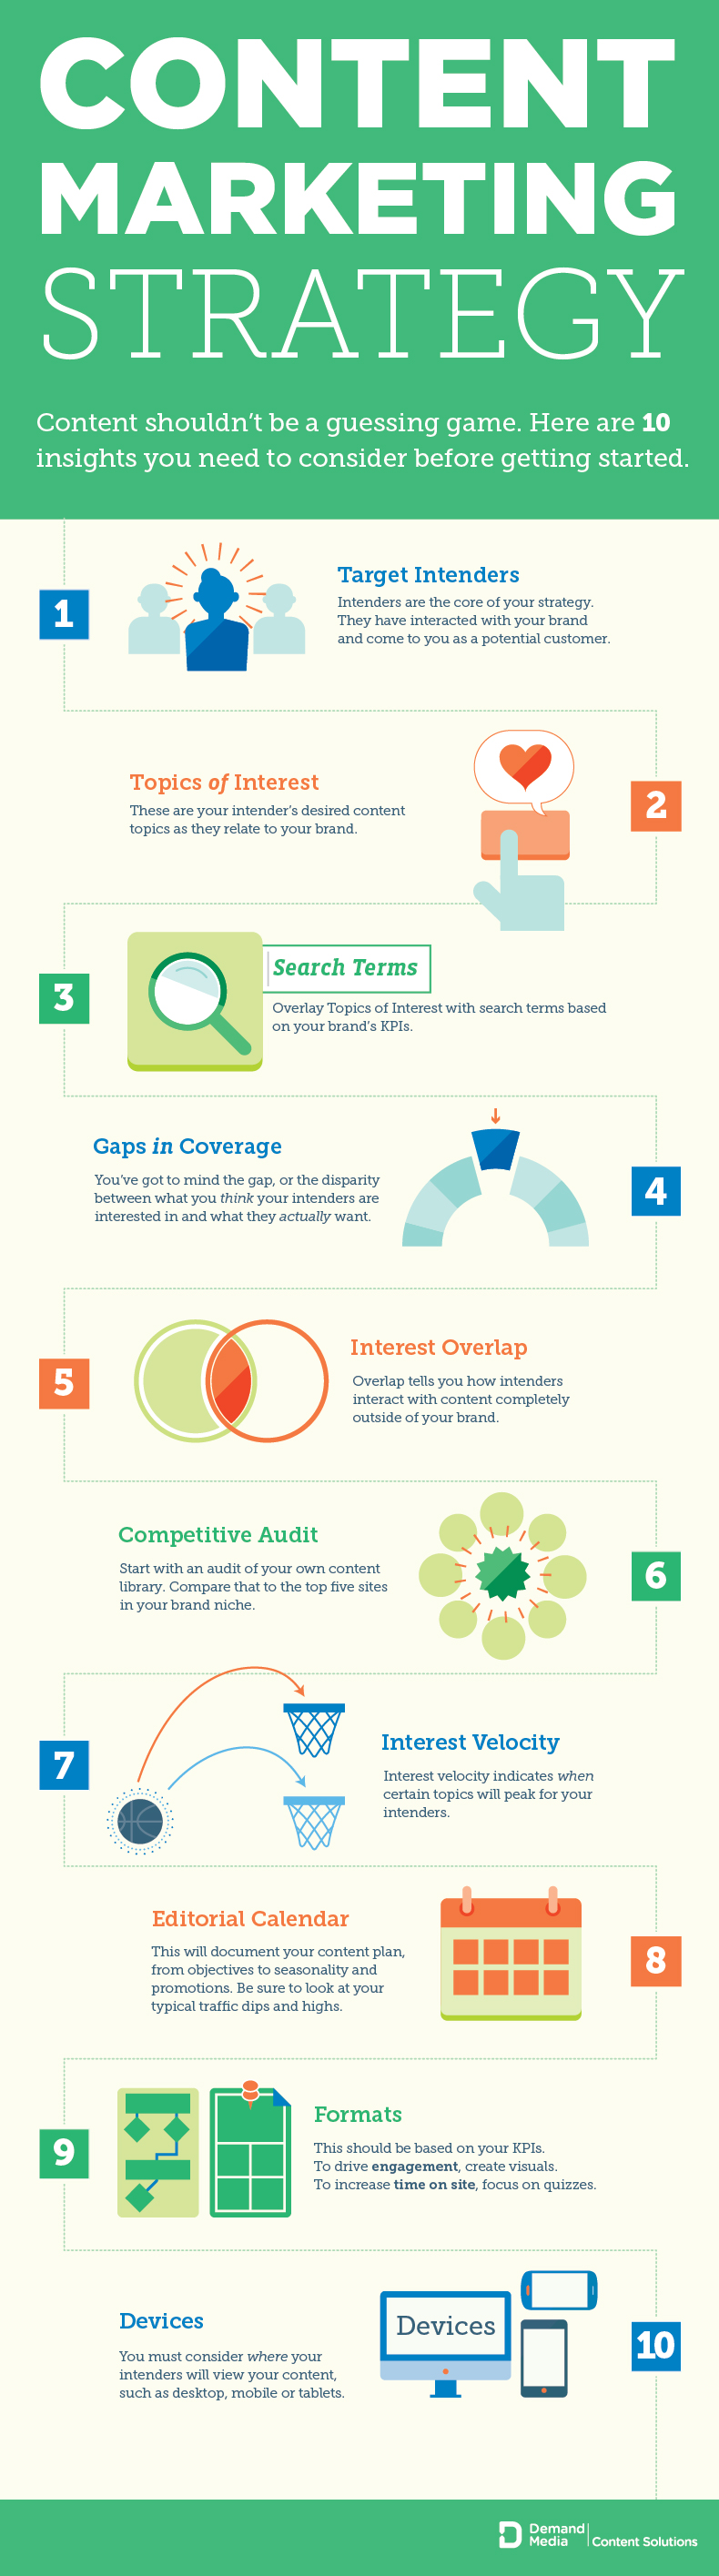 Content marketing strategy infographic